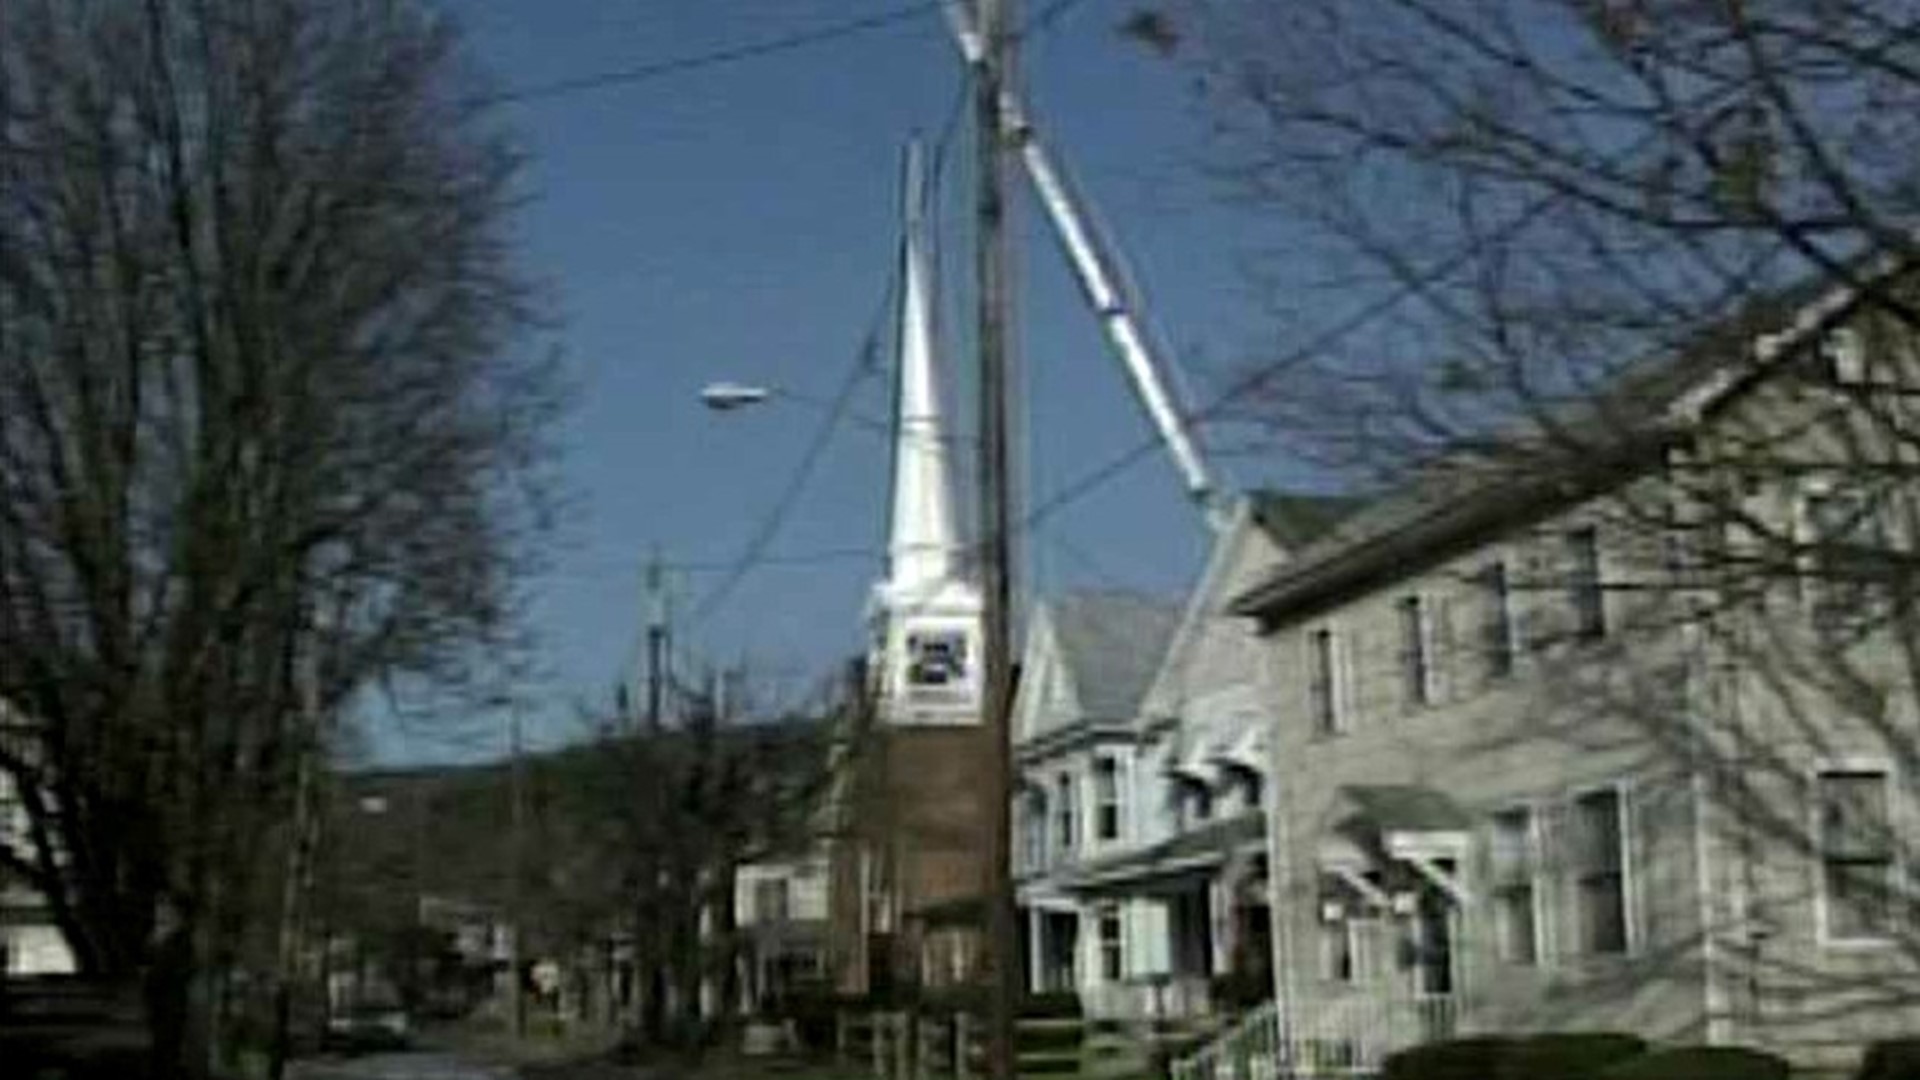 A Steeple For Snydertown